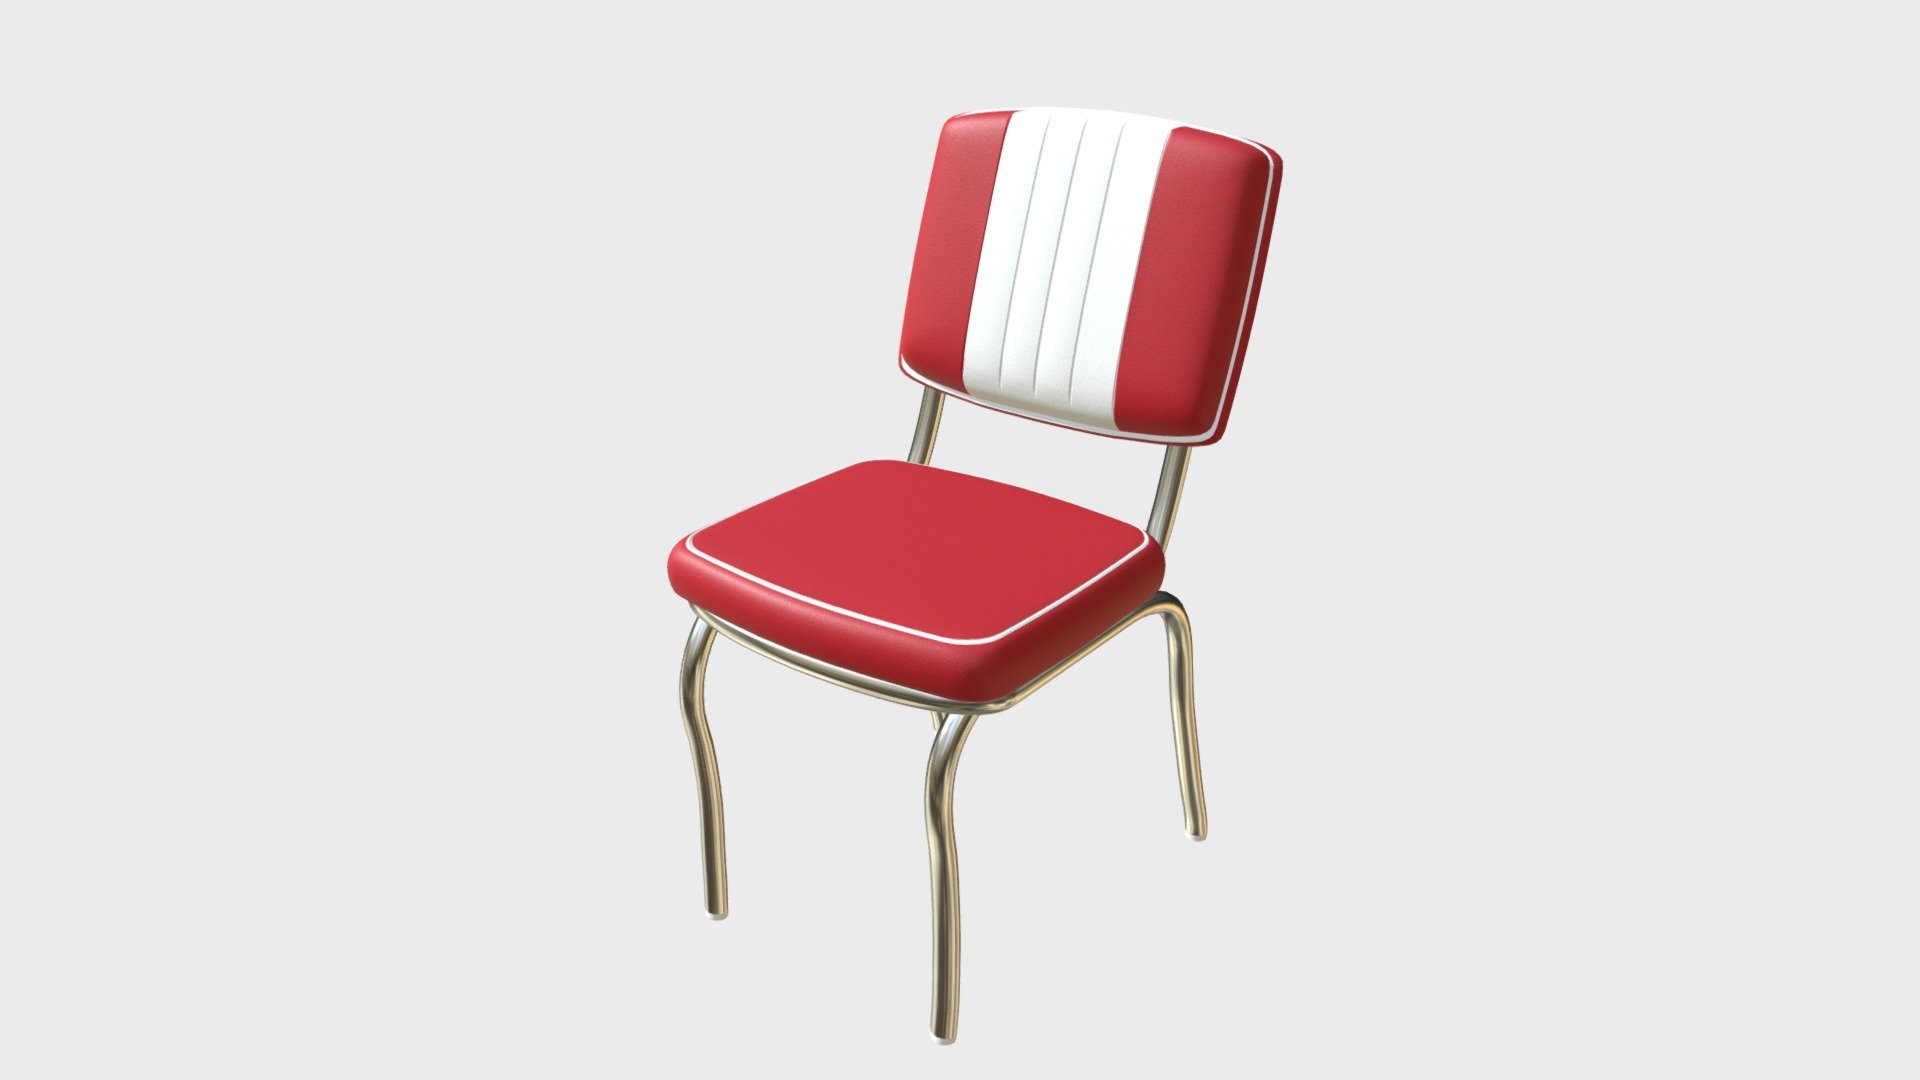 === The following description refers to the additional ZIP package provided with this model ===

Retro diner chair 3D Model, nr. 2 in my collection. Production-ready 3D Model, with PBR materials, textures, non overlapping UV Layout map provided in the package.

Quads only geometries (no tris/ngons).

Formats included: FBX, OBJ; scenes: BLEND (with Cycles / Eevee PBR Materials and Textures); other: 16-bit PNGs with Alpha.

1 Object (mesh), 1 PBR Material, UV unwrapped (non overlapping UV Layout map provided in the package); UV-mapped Textures.

UV Layout maps and Image Textures resolutions: 2048x2048; PBR Textures made with Substance Painter.

Polygonal, QUADS ONLY (no tris/ngons); 9840 vertices, 9832 quad faces (19664 tris).

Real world dimensions; scene scale units: cm in Blender 3.6.1 LTS (that is: Metric with 0.01 scale).

Uniform scale object (scale applied in Blender 3.6.1 LTS) 3d model